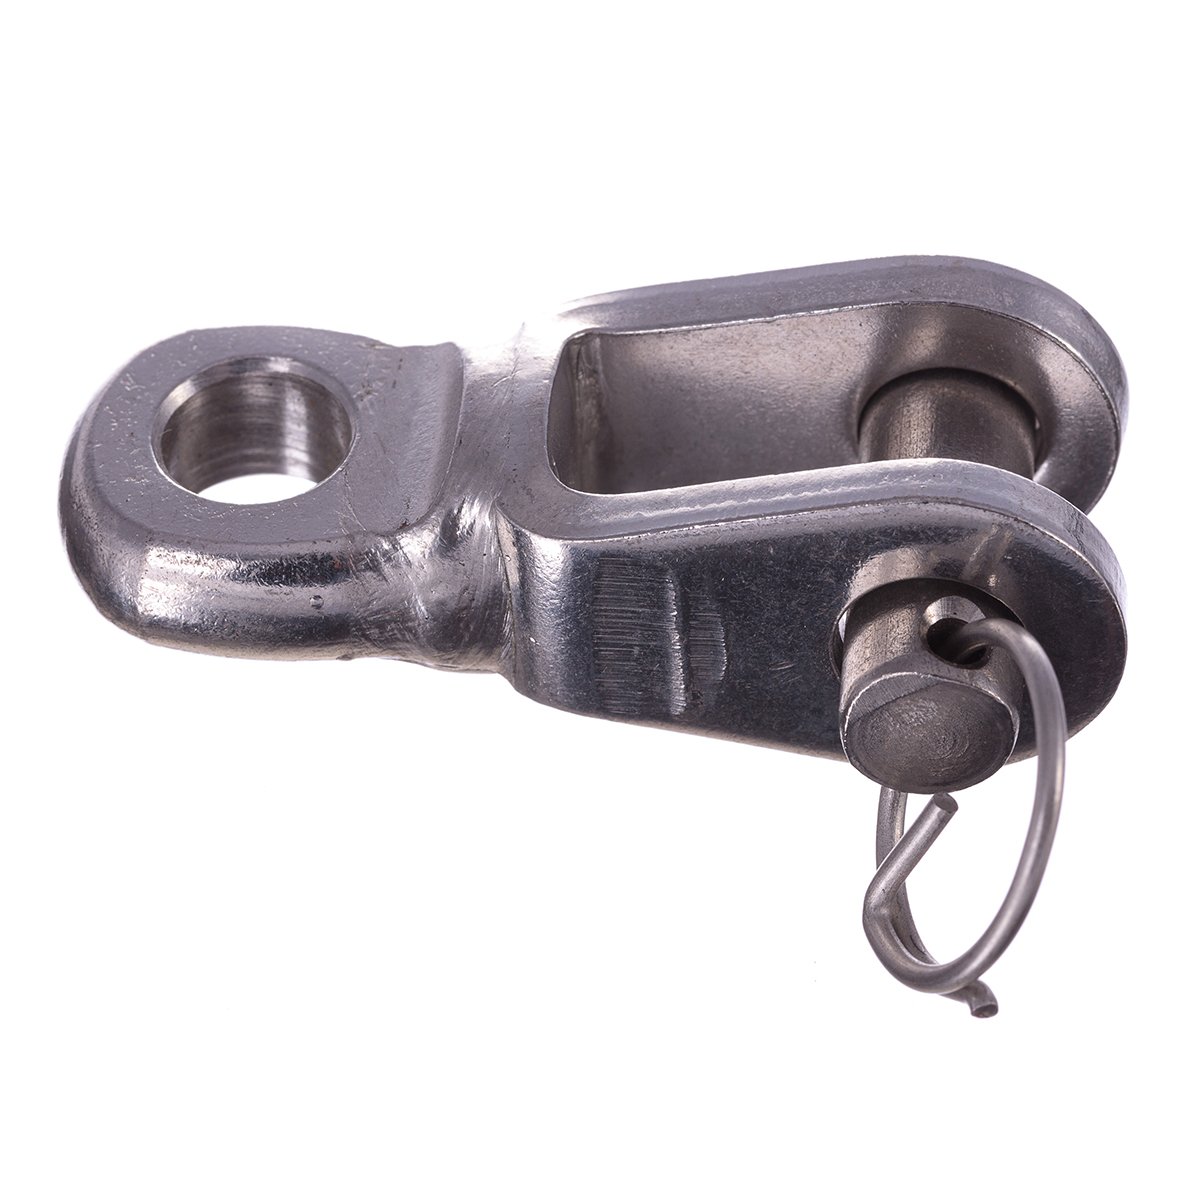 R9680 - Rigging Toggle 10mm  (Pk Size: 1)